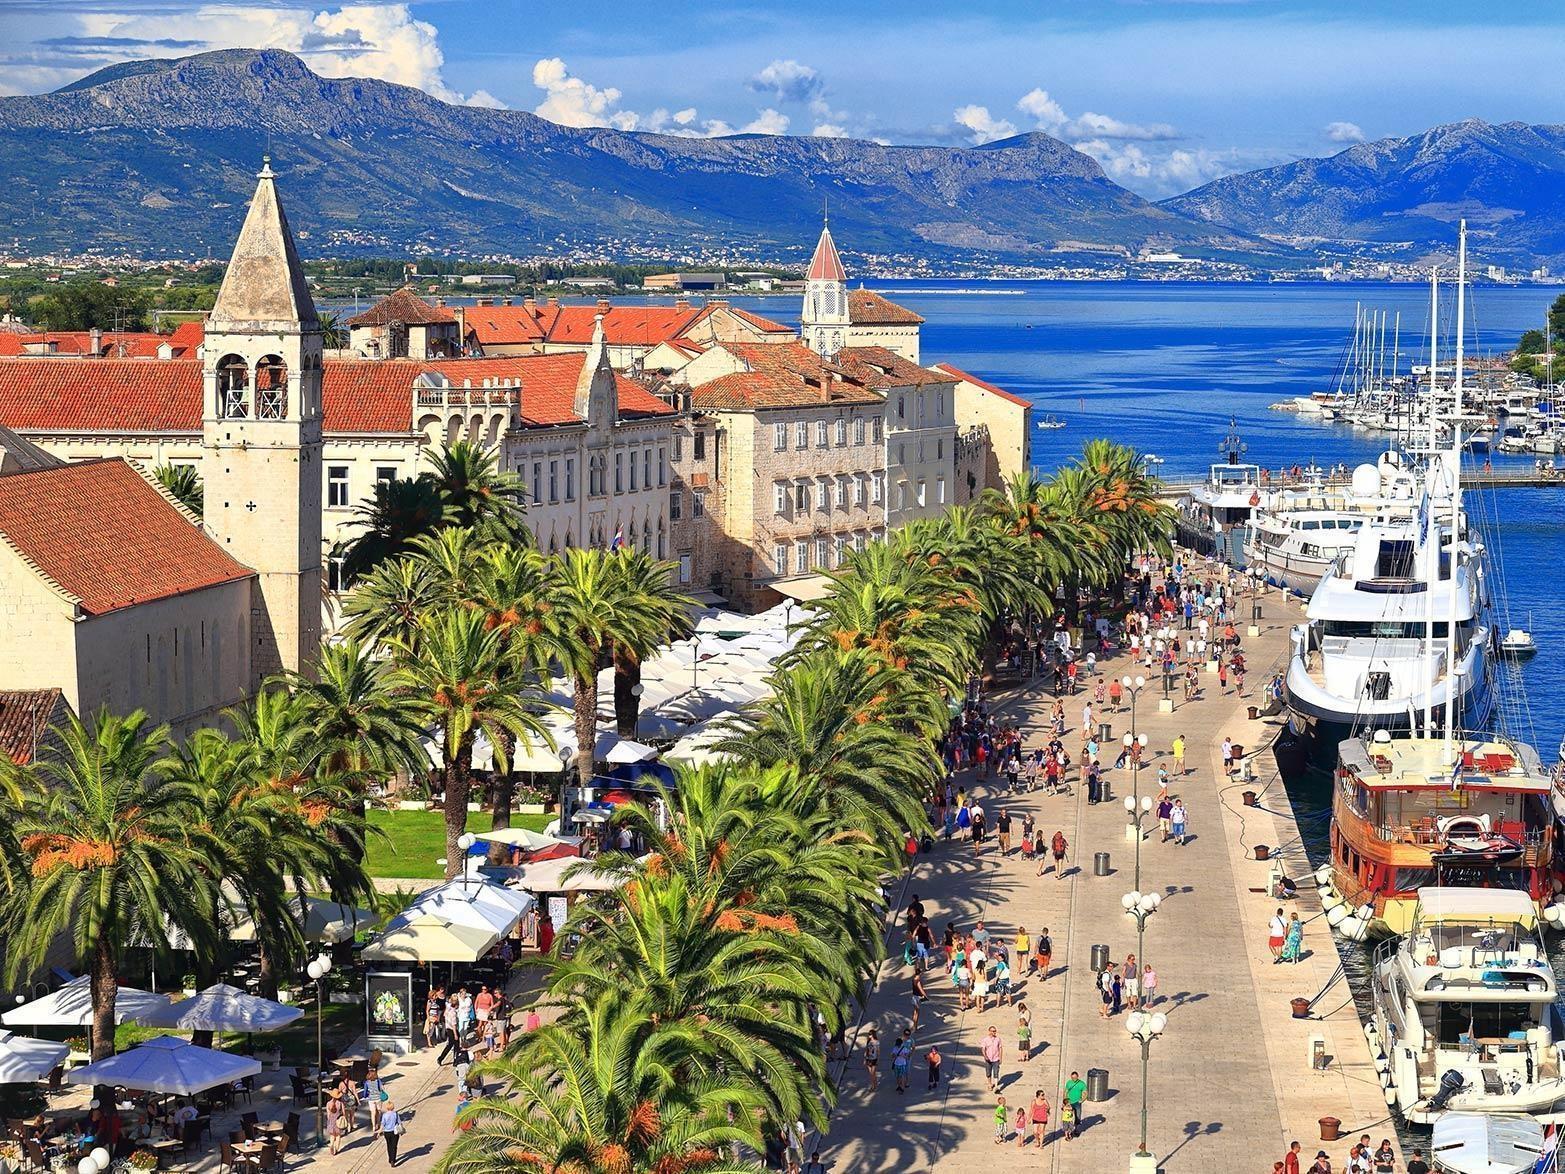 The beautiful historic town of Trogir with Blue Shark Split